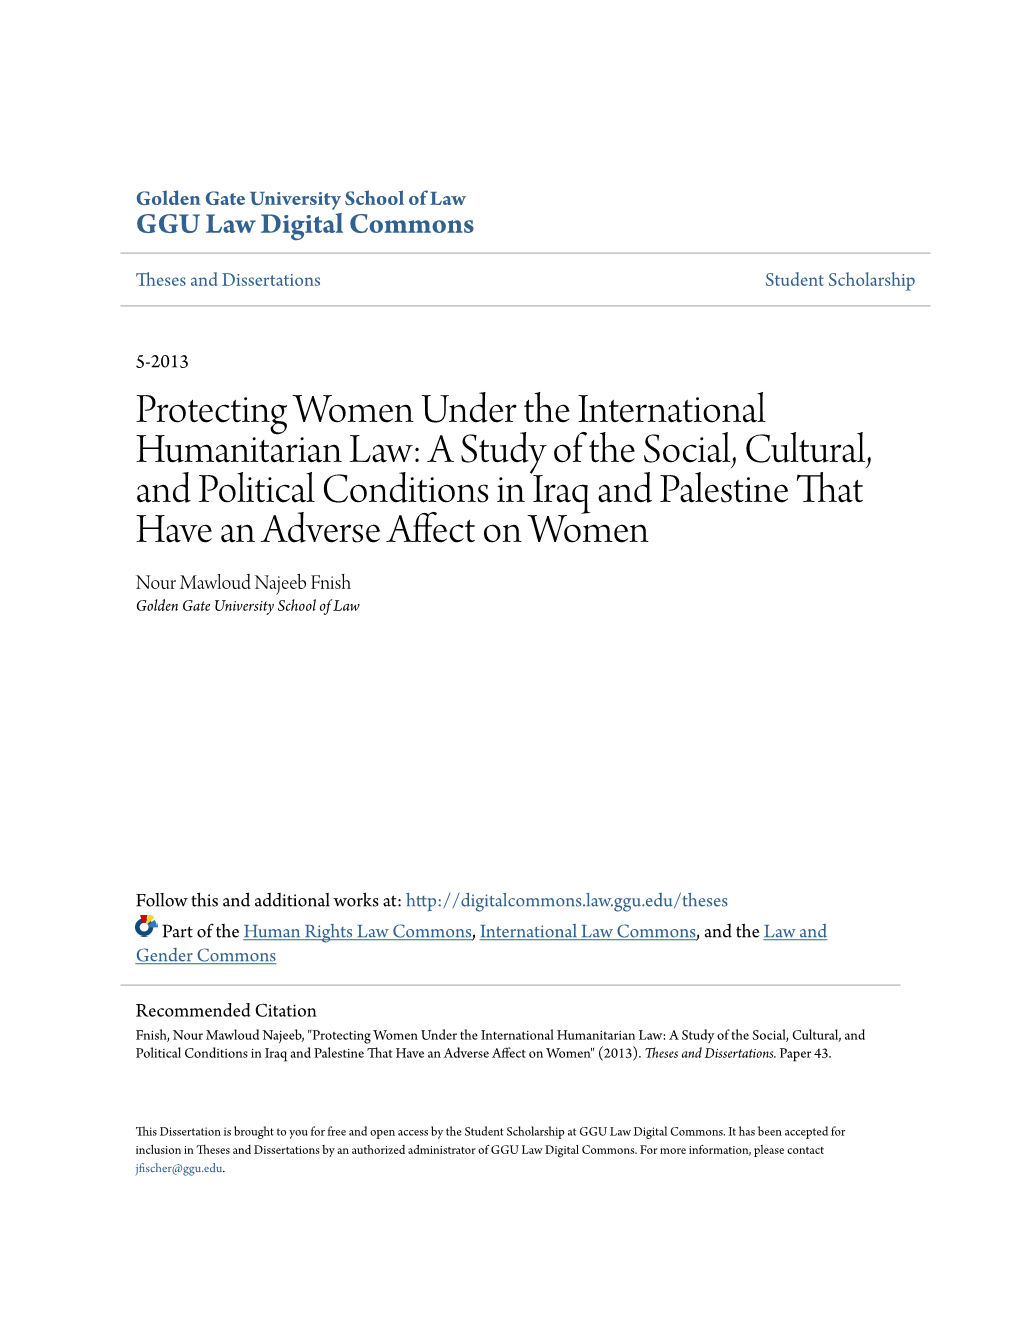 Protecting Women Under the International Humanitarian Law: A